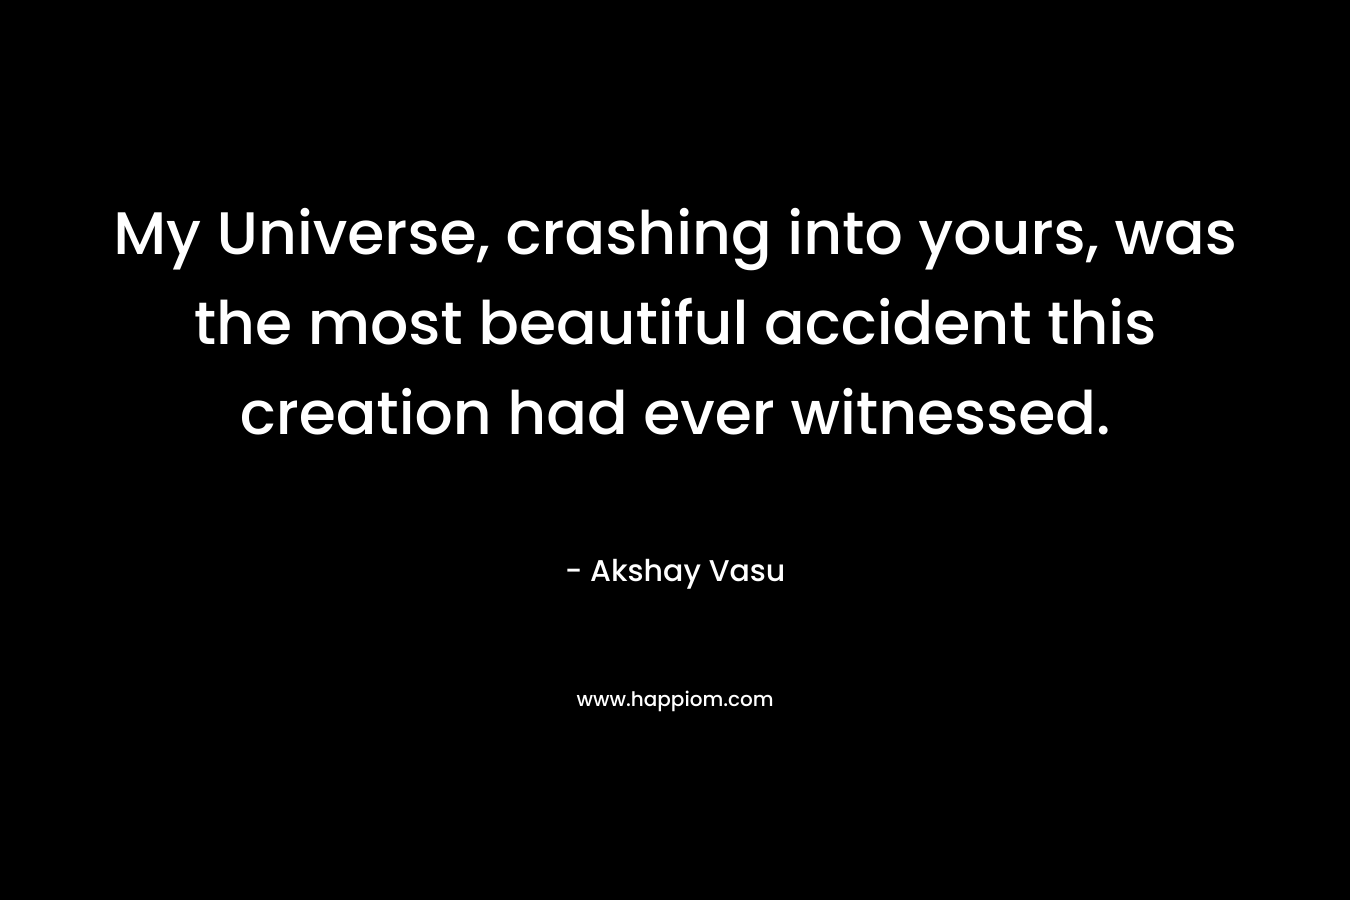 My Universe, crashing into yours, was the most beautiful accident this creation had ever witnessed. – Akshay Vasu